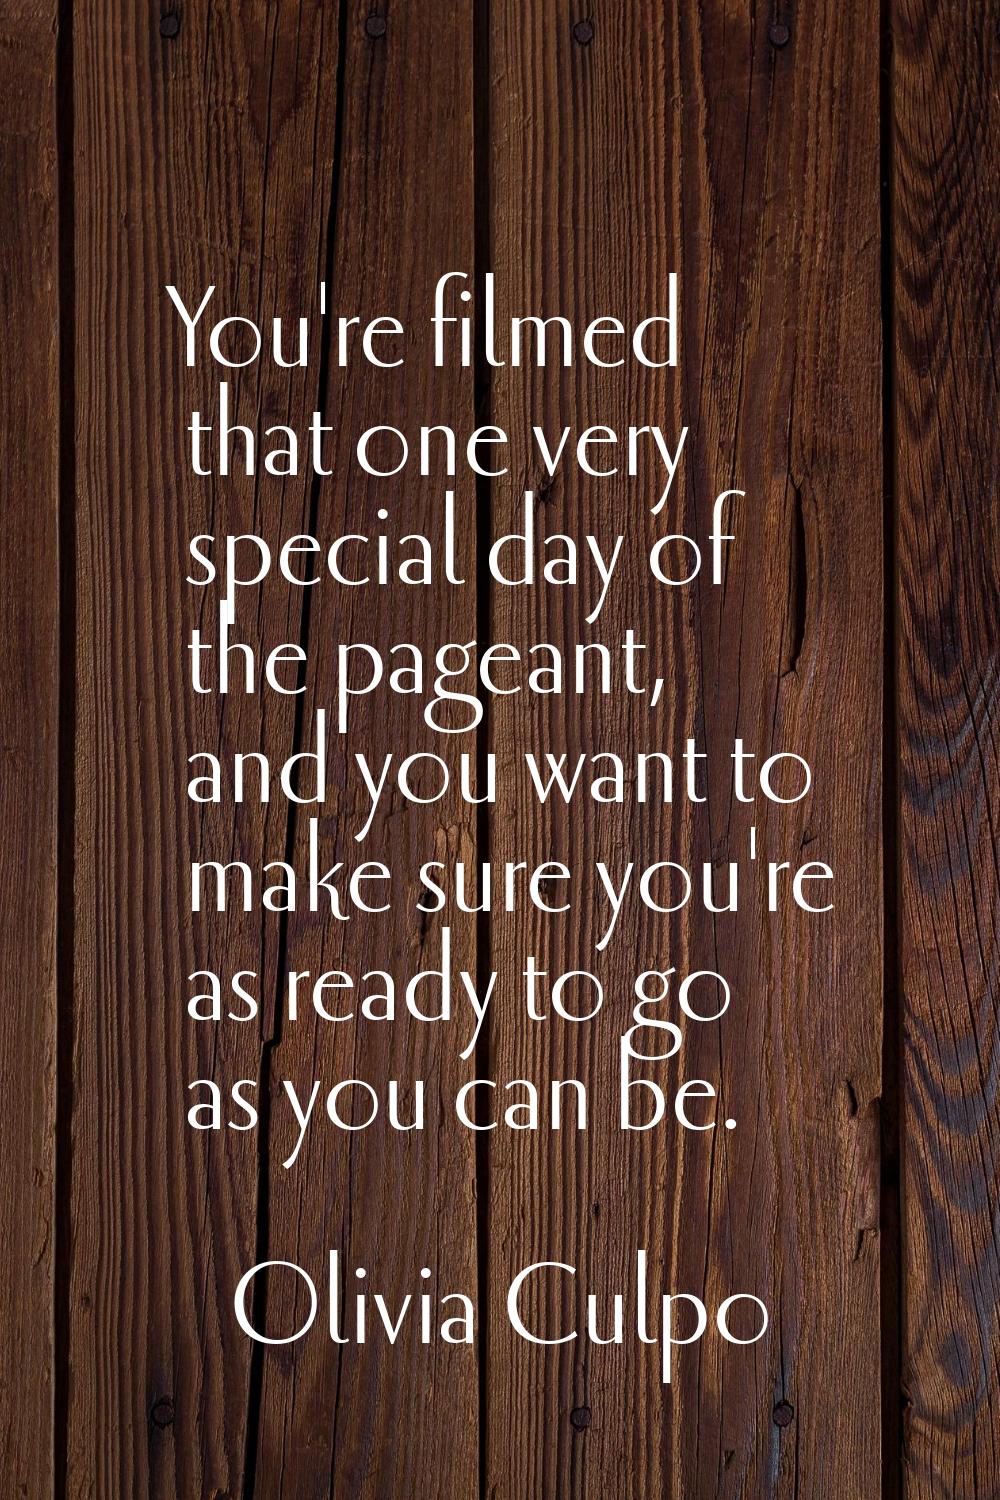 You're filmed that one very special day of the pageant, and you want to make sure you're as ready t